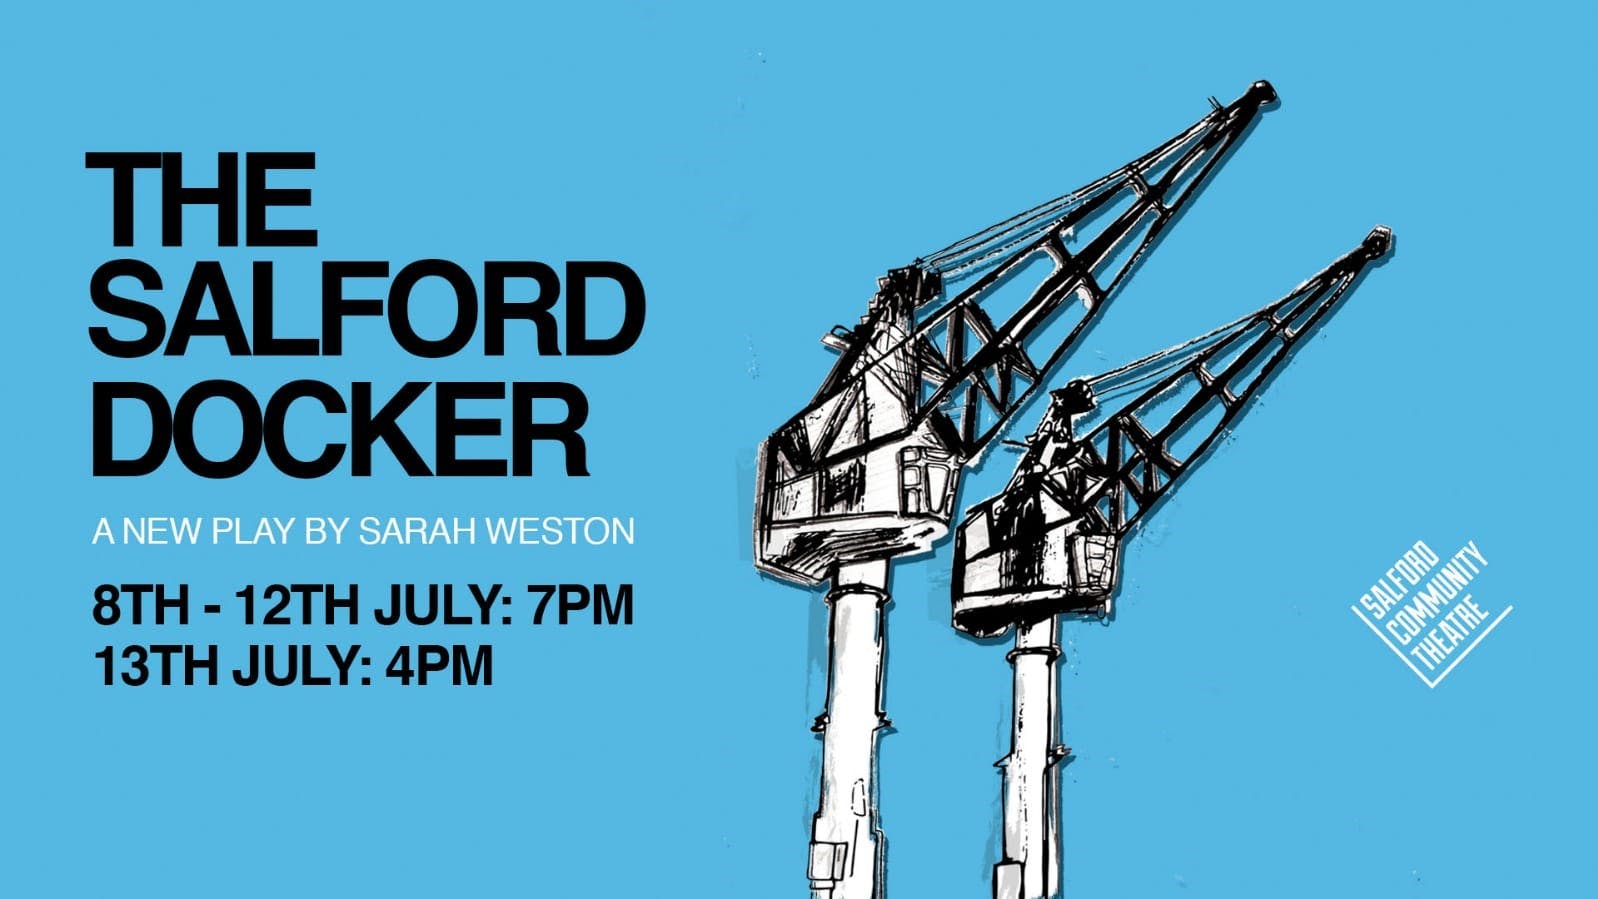 Salford Community Theatre present their newest community play – The Salford Docker!